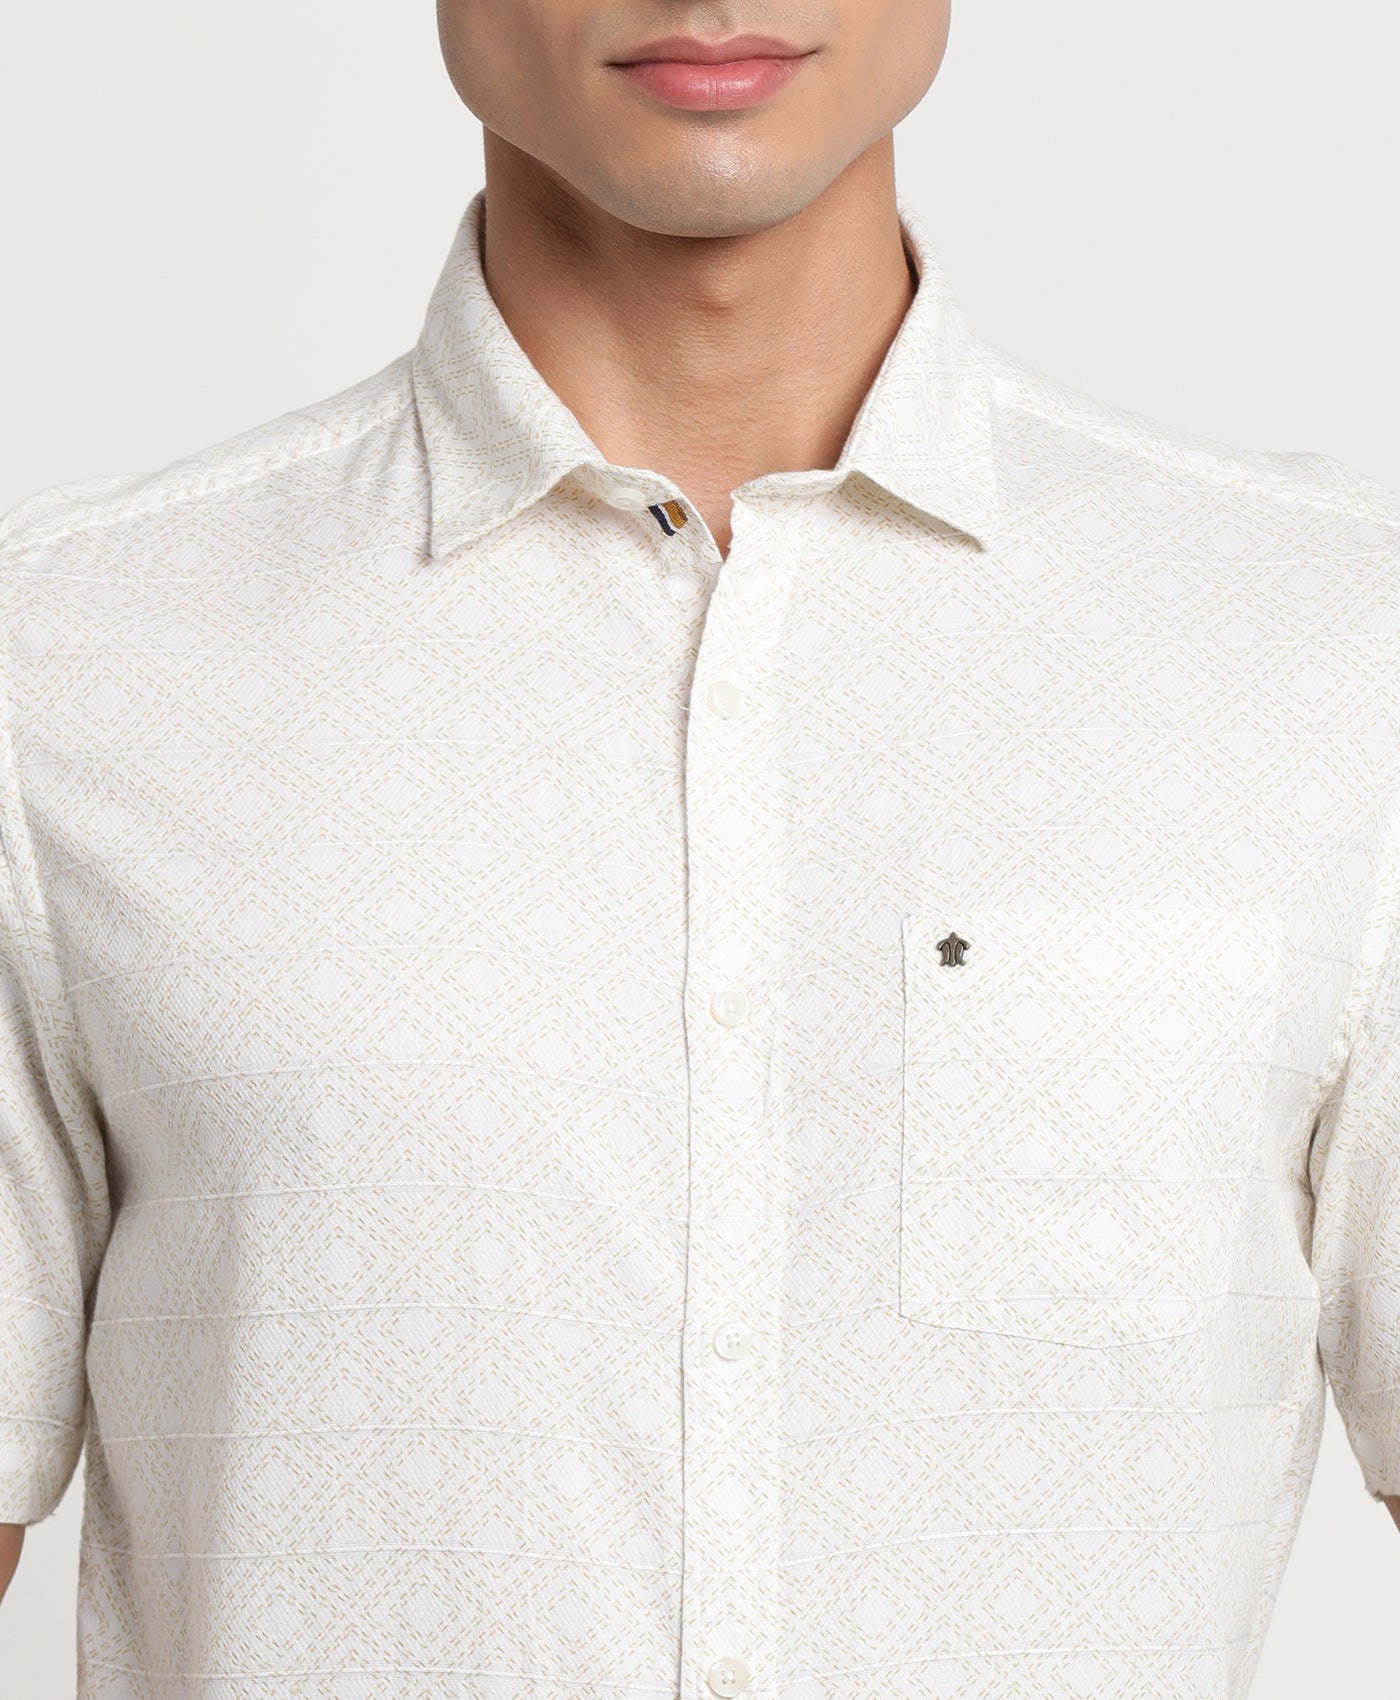 100% Cotton White Printed Slim Fit Half Sleeve Casual Shirt